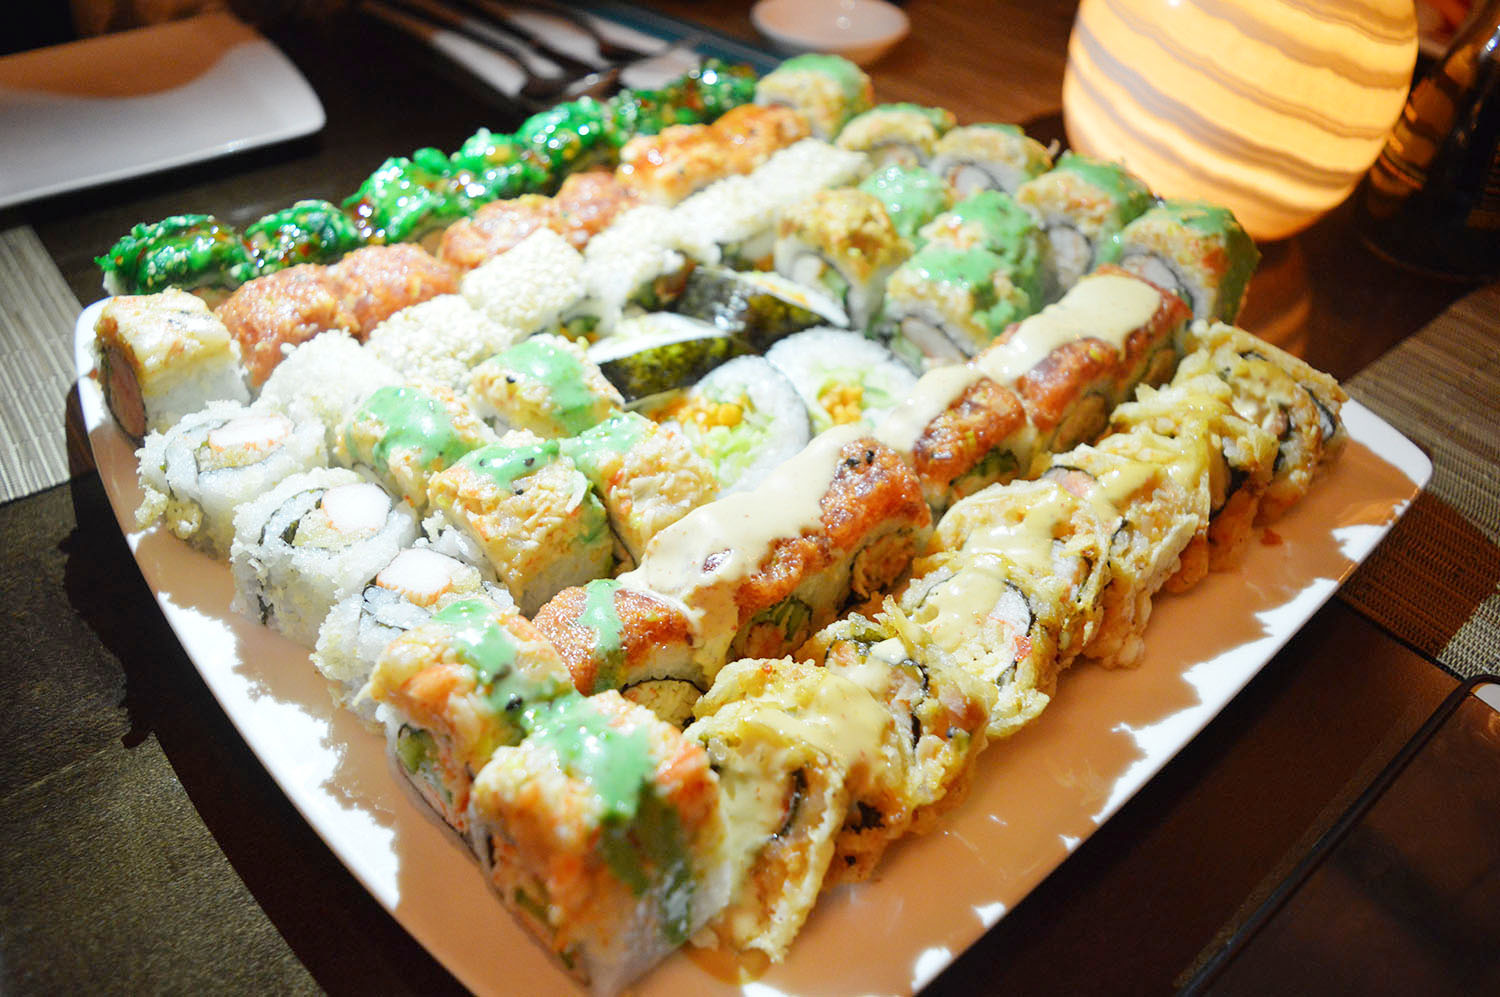 All You Can Eat Sushi @ Trattoria - Photo Credit: thespotist.com